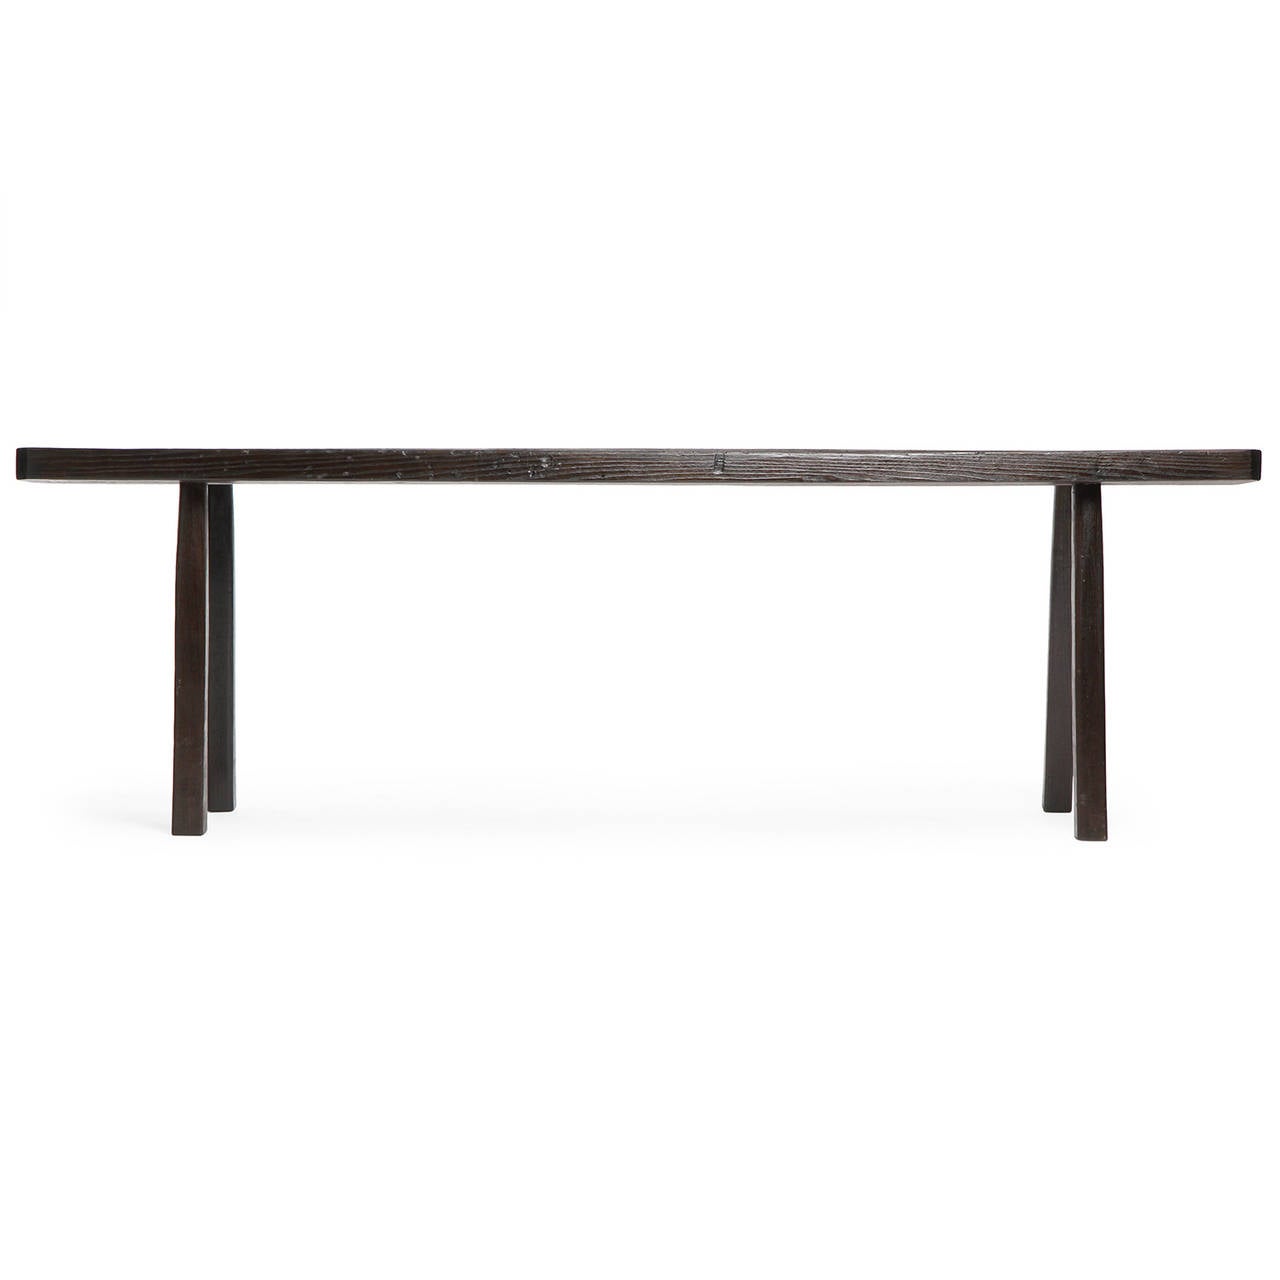 An ebonized oak console table with textured grain and through tenon splayed legs.